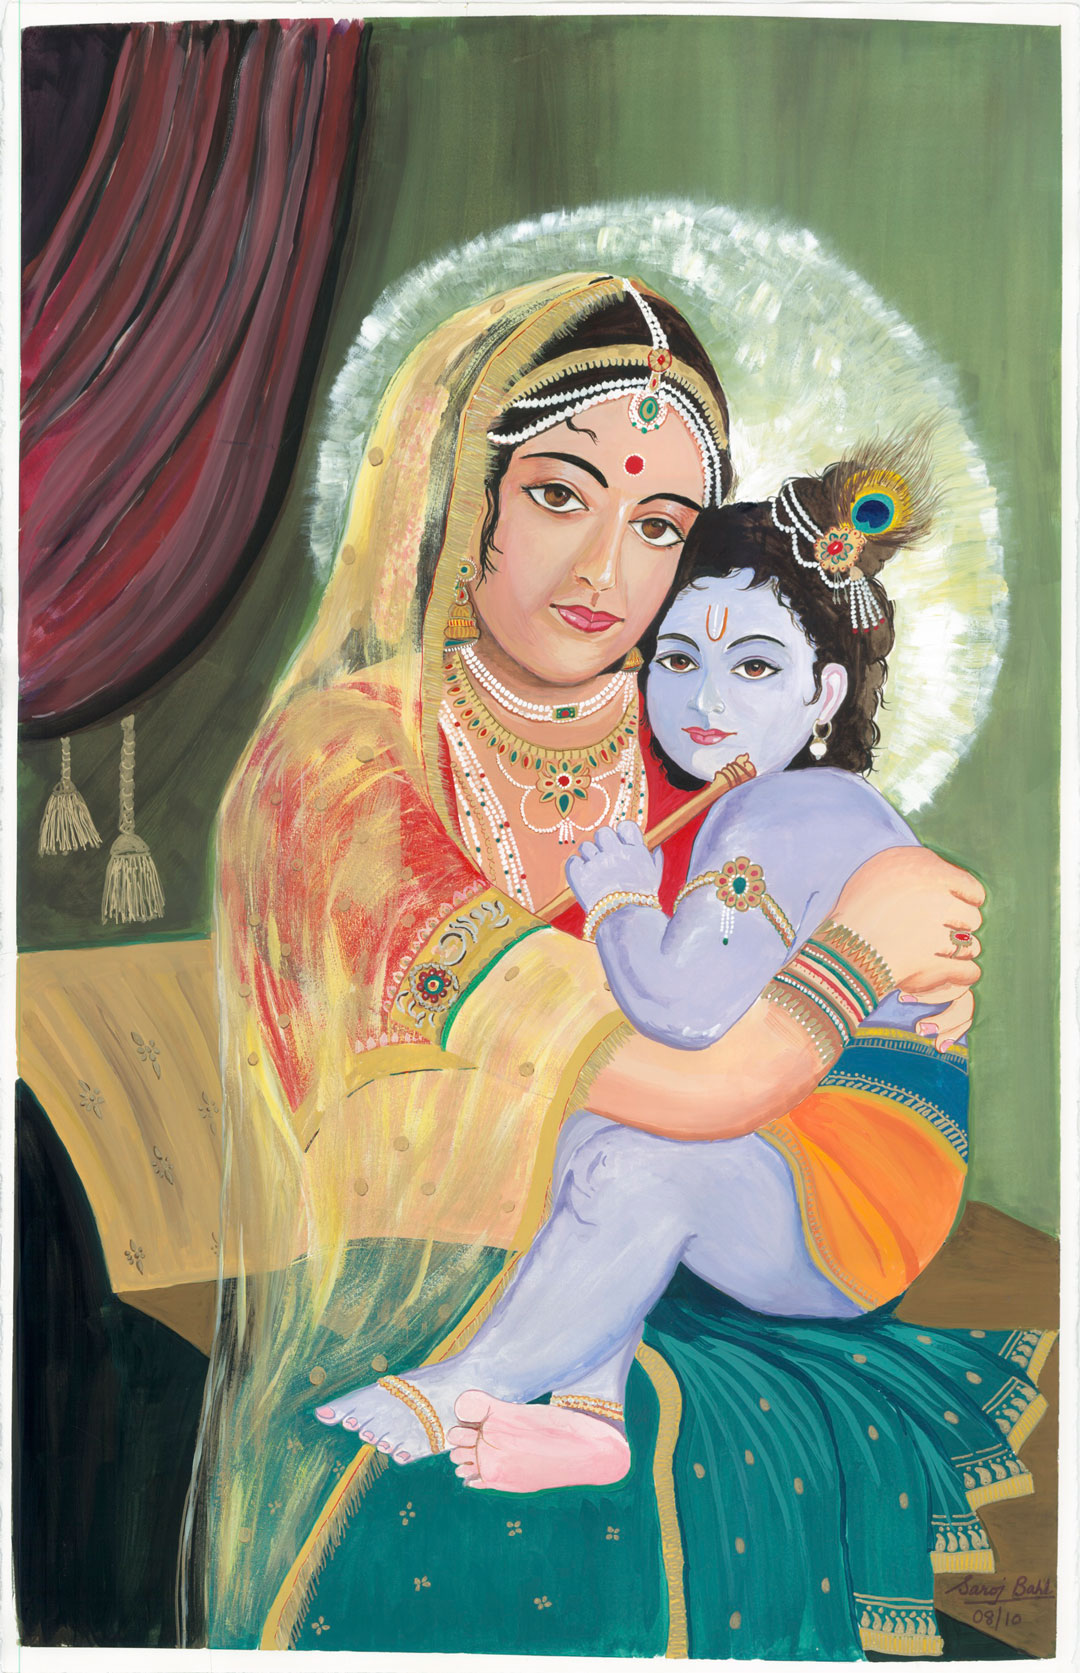 A painting of an indian woman holding a child.